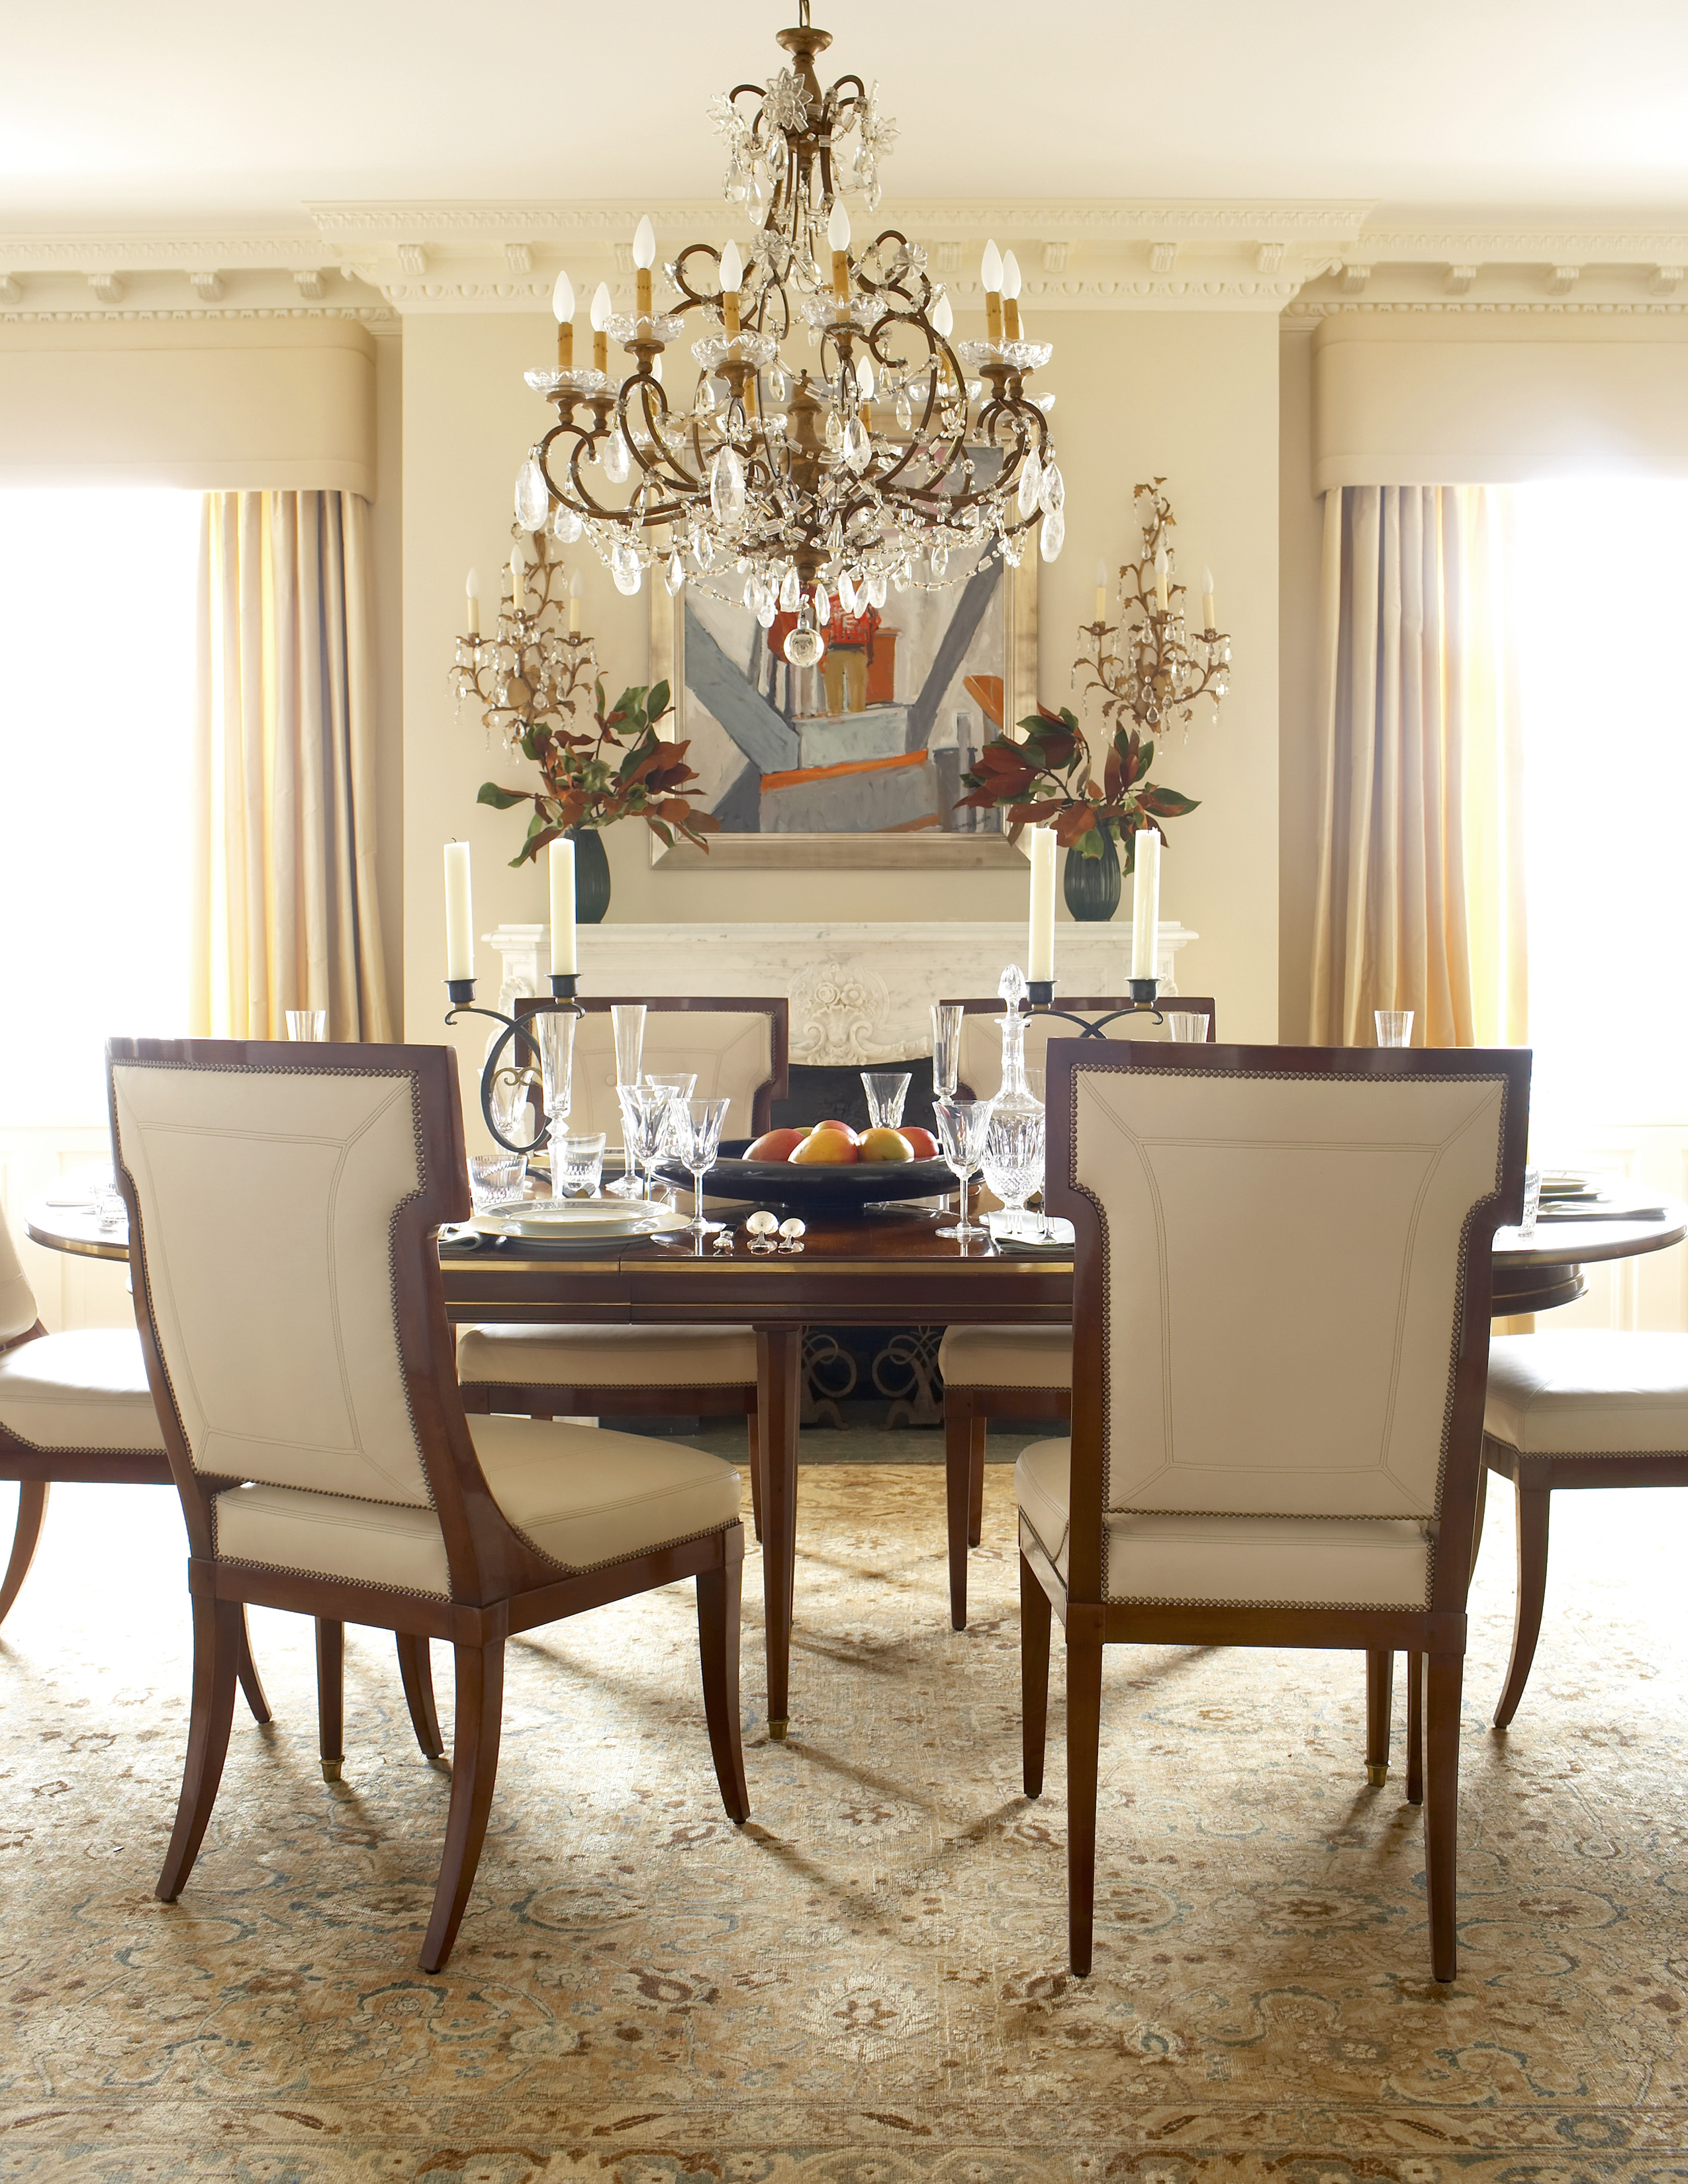  Contemporary Traditional Apartment Dining Room. Central Park West  by Goralnick Architecture and Deisgn.